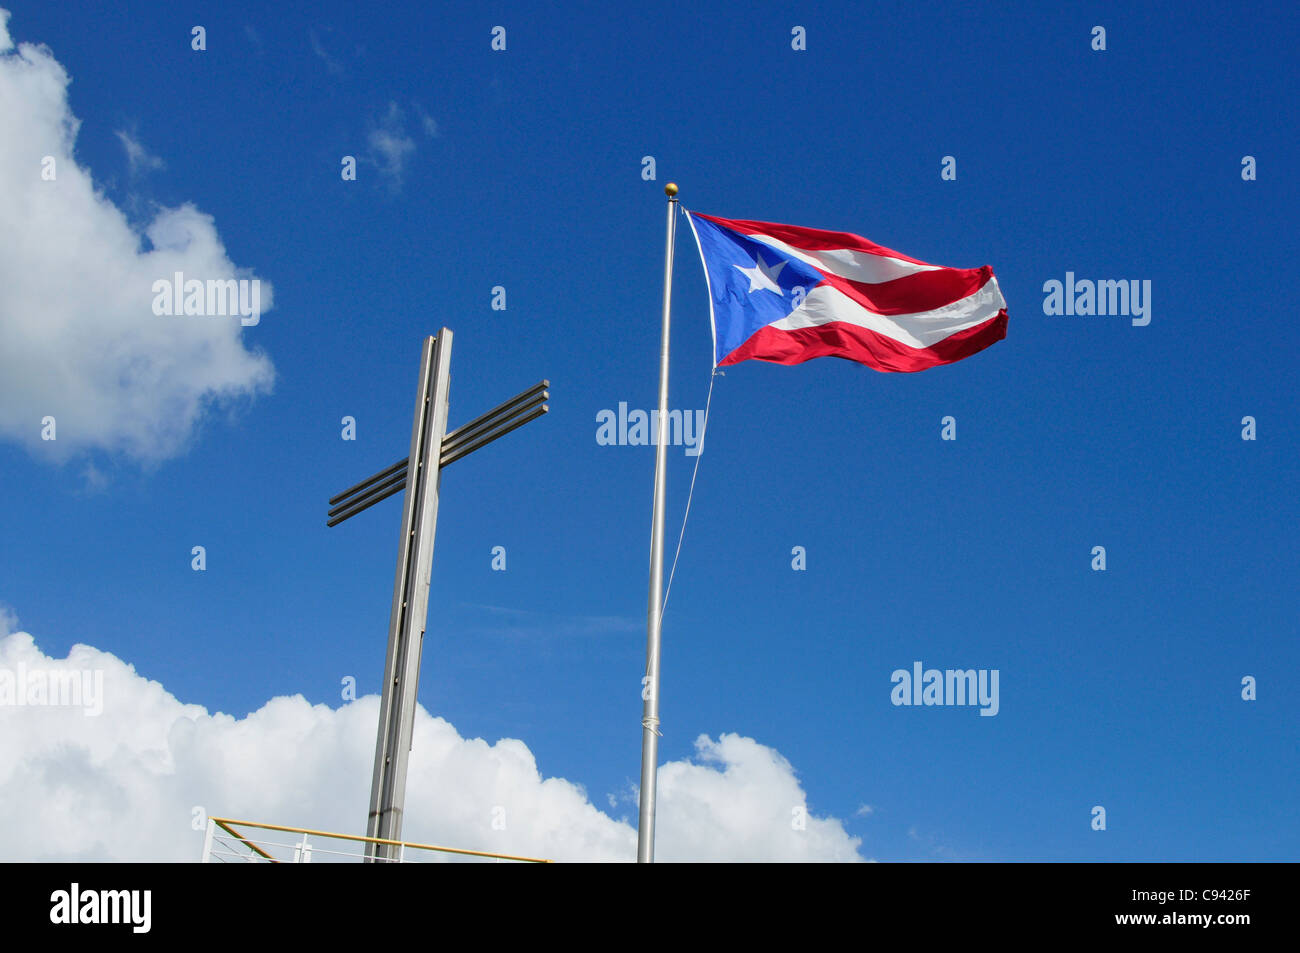 Picture shows a flag of Puerto Rico fluttering in the sun and a cross side by side symbolizing the Catholic faith of the people. Stock Photo